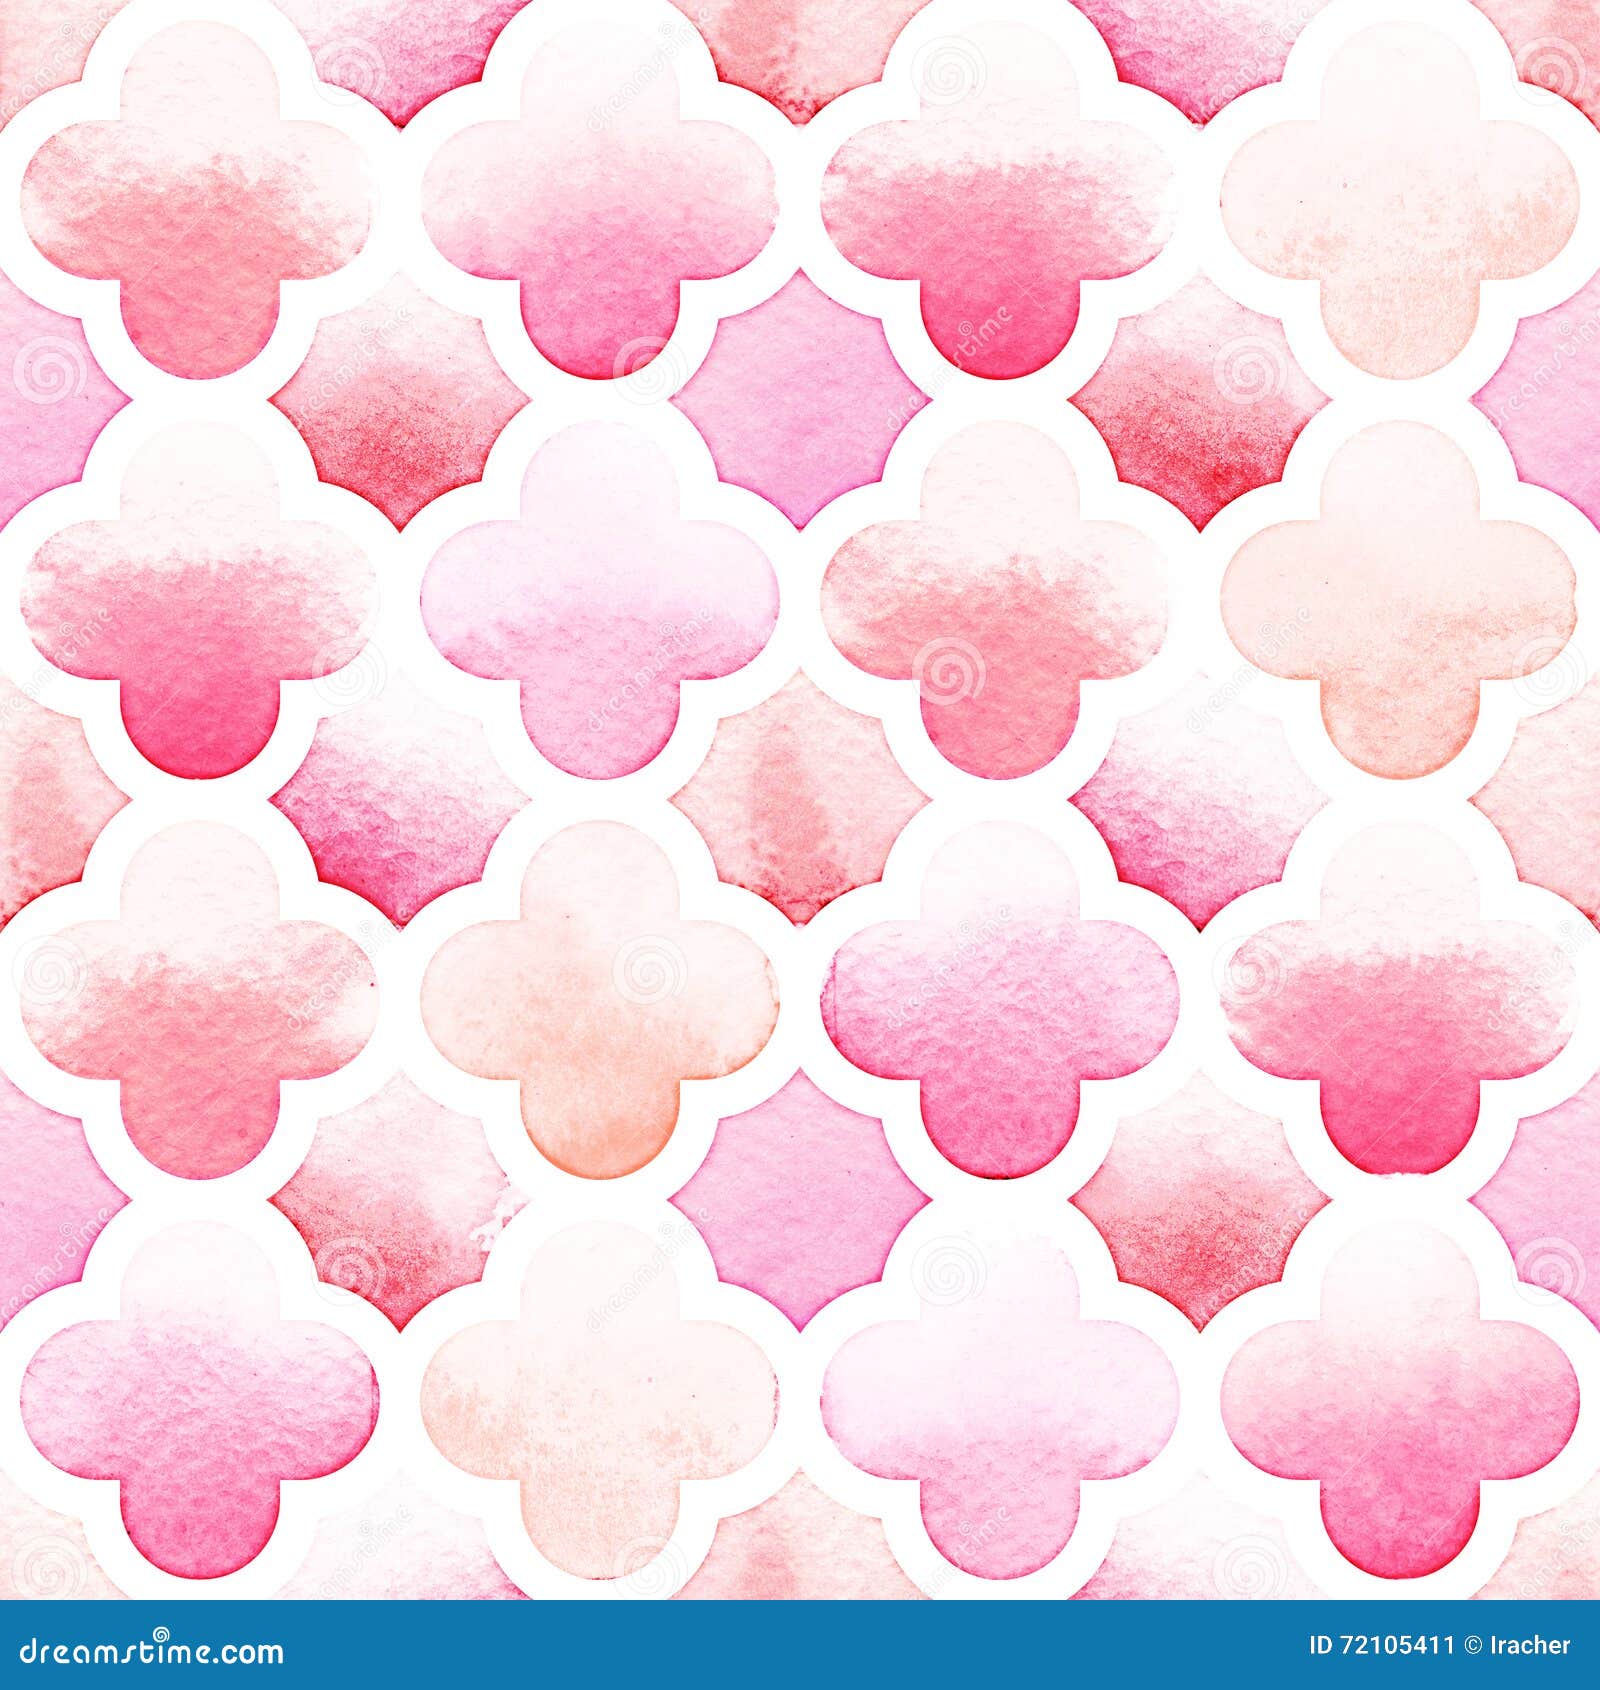 morrocan ornament of pink colors with quatrefoil on white background. watercolor seamless pattern